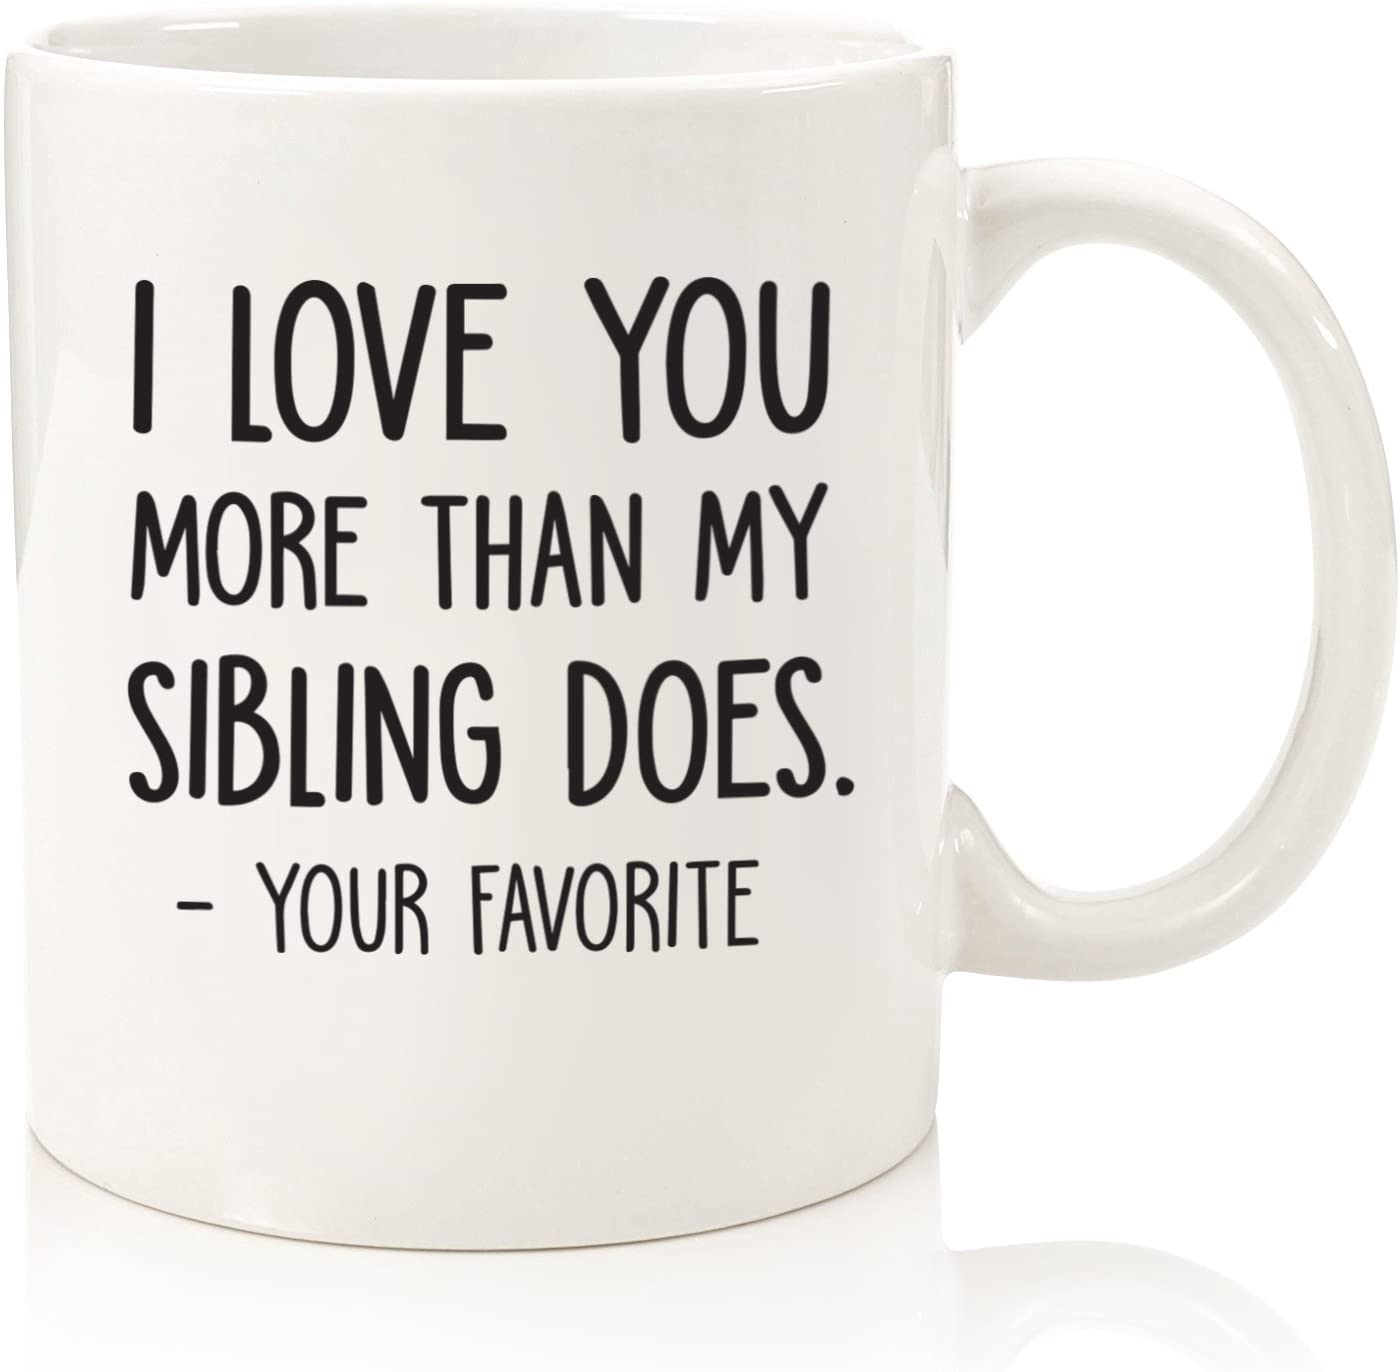 I Love You More : Your Favorite Funny Coffee Mug - Best Mom & Dad Valentines Day Gifts - Gag Gift from Daughter, Son, Kids - Novelty Birthday Present Idea for Parents- Fun Cup for Men, Women, Him, Her